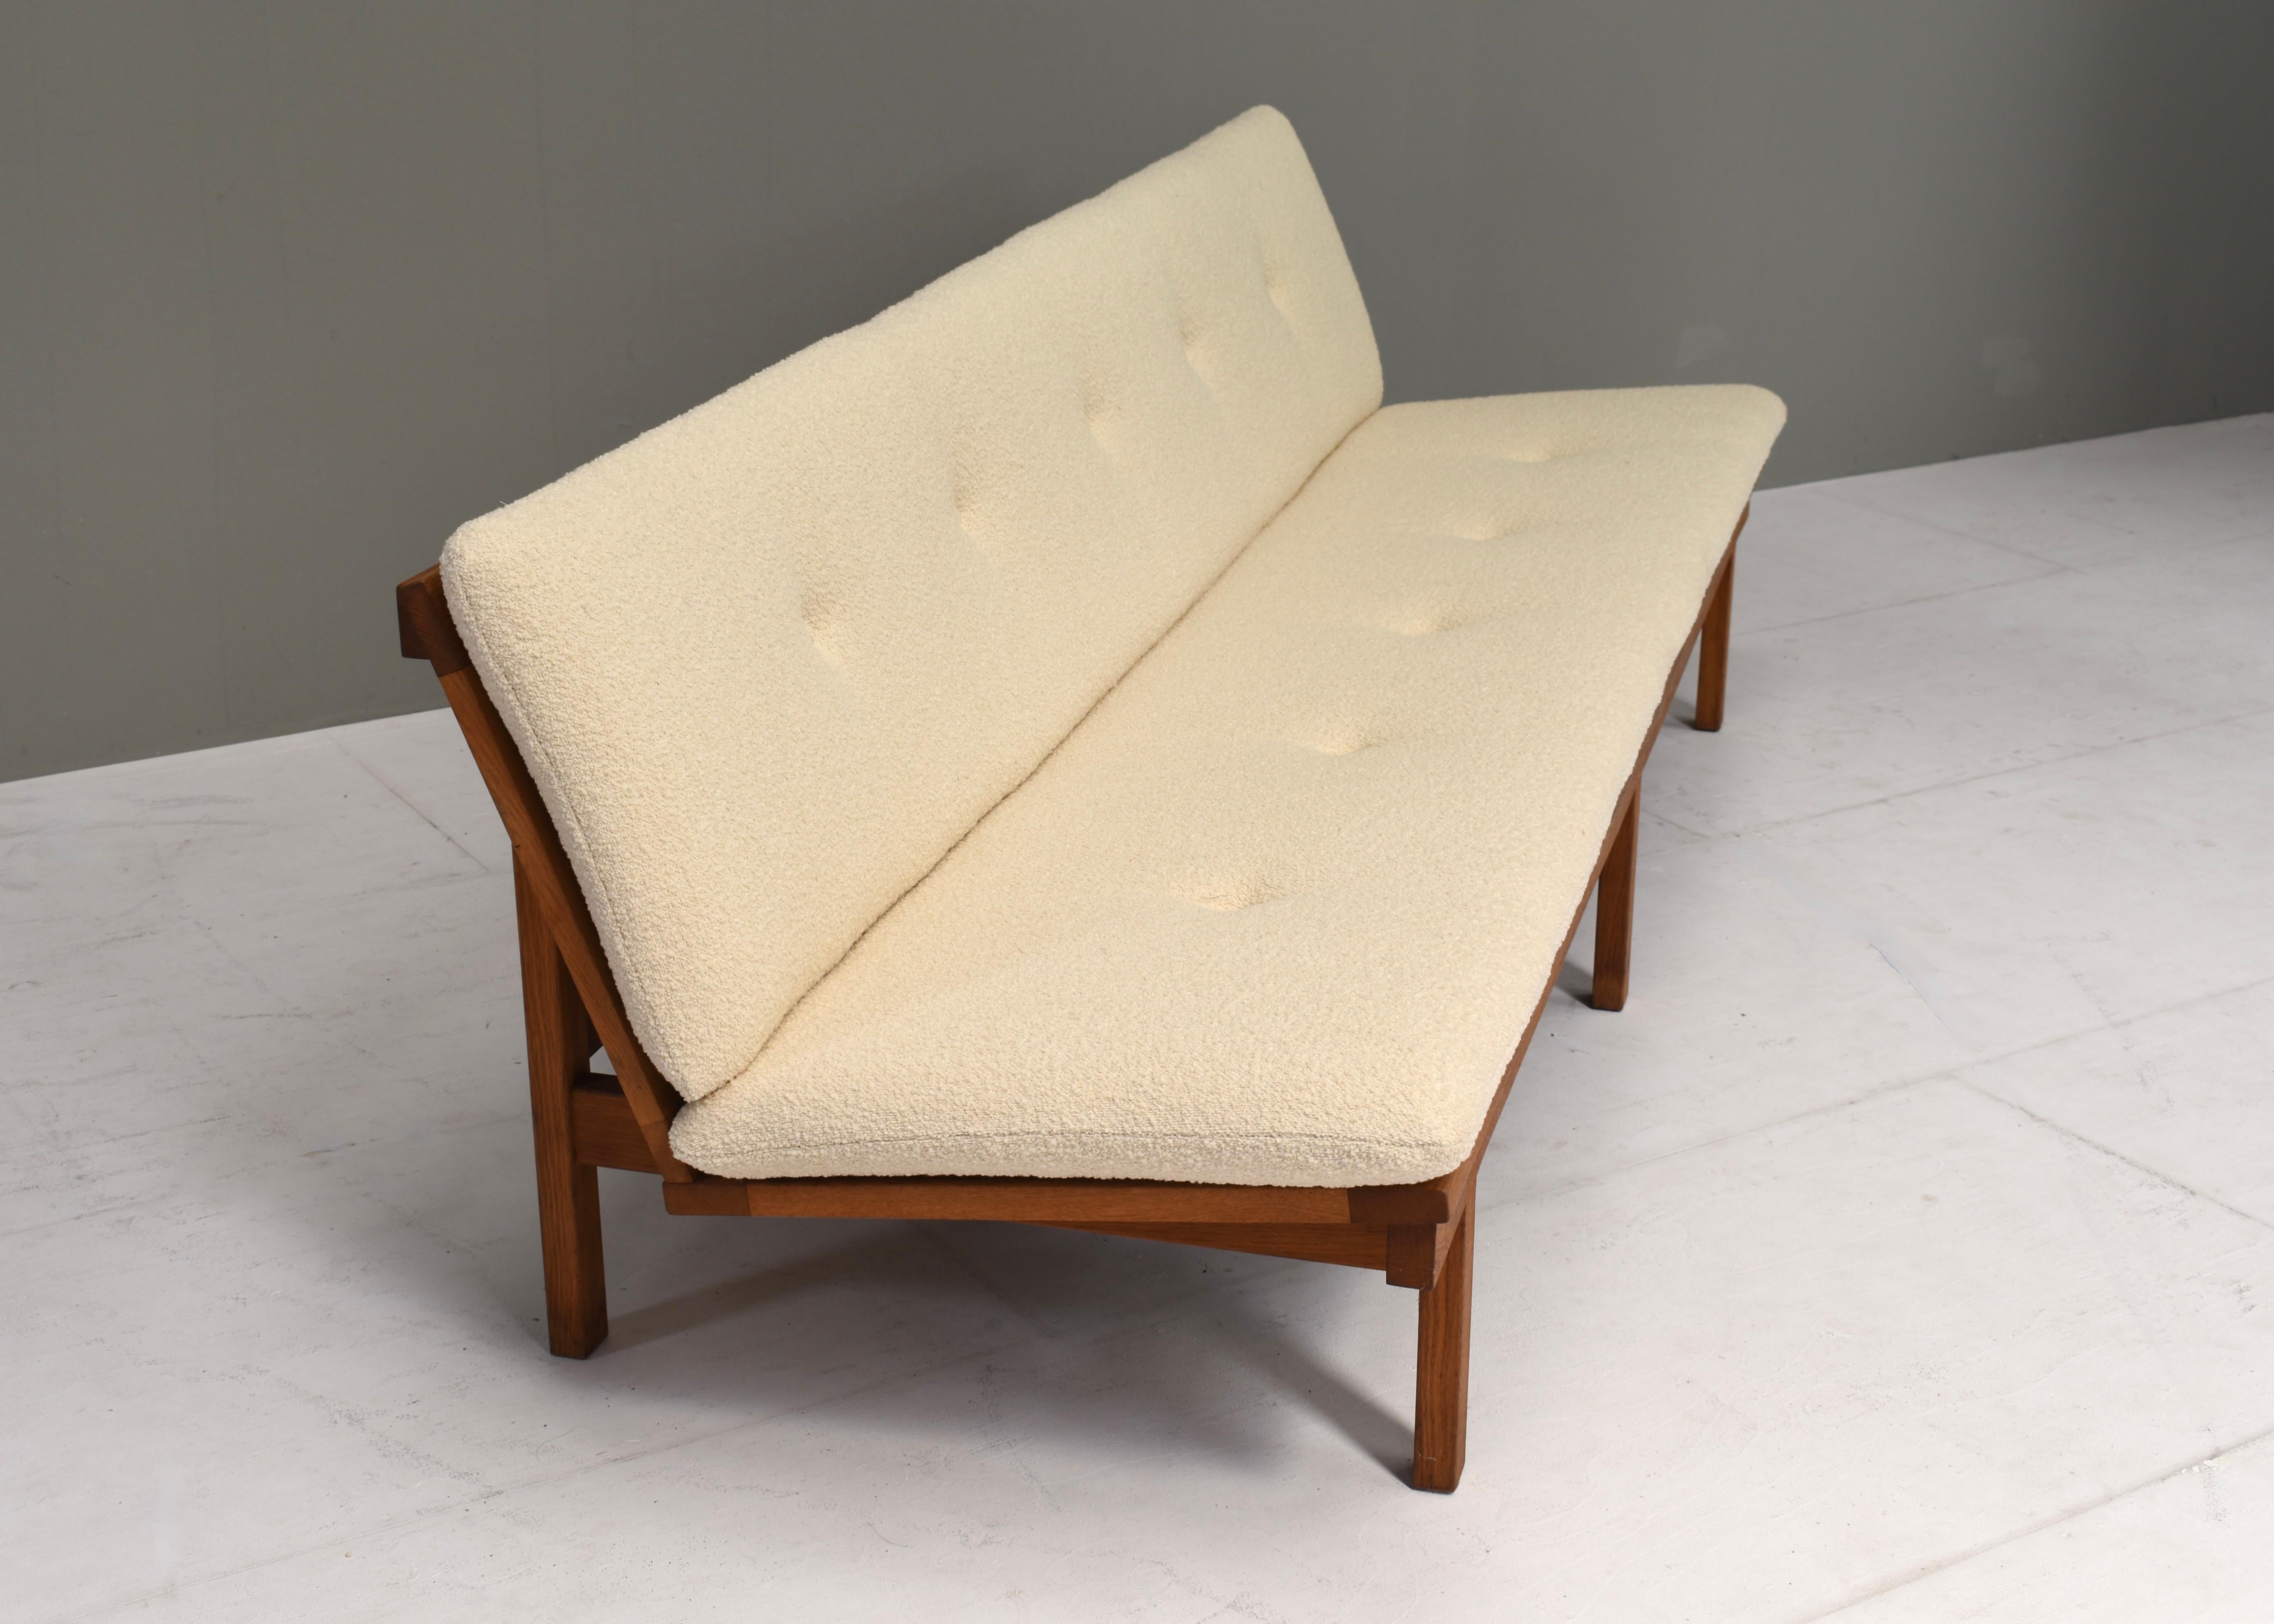 Mid-20th Century Børge Mogensen for Fredericia Sofa in Oak and New Bouclé Fabric, Denmark, 1950s